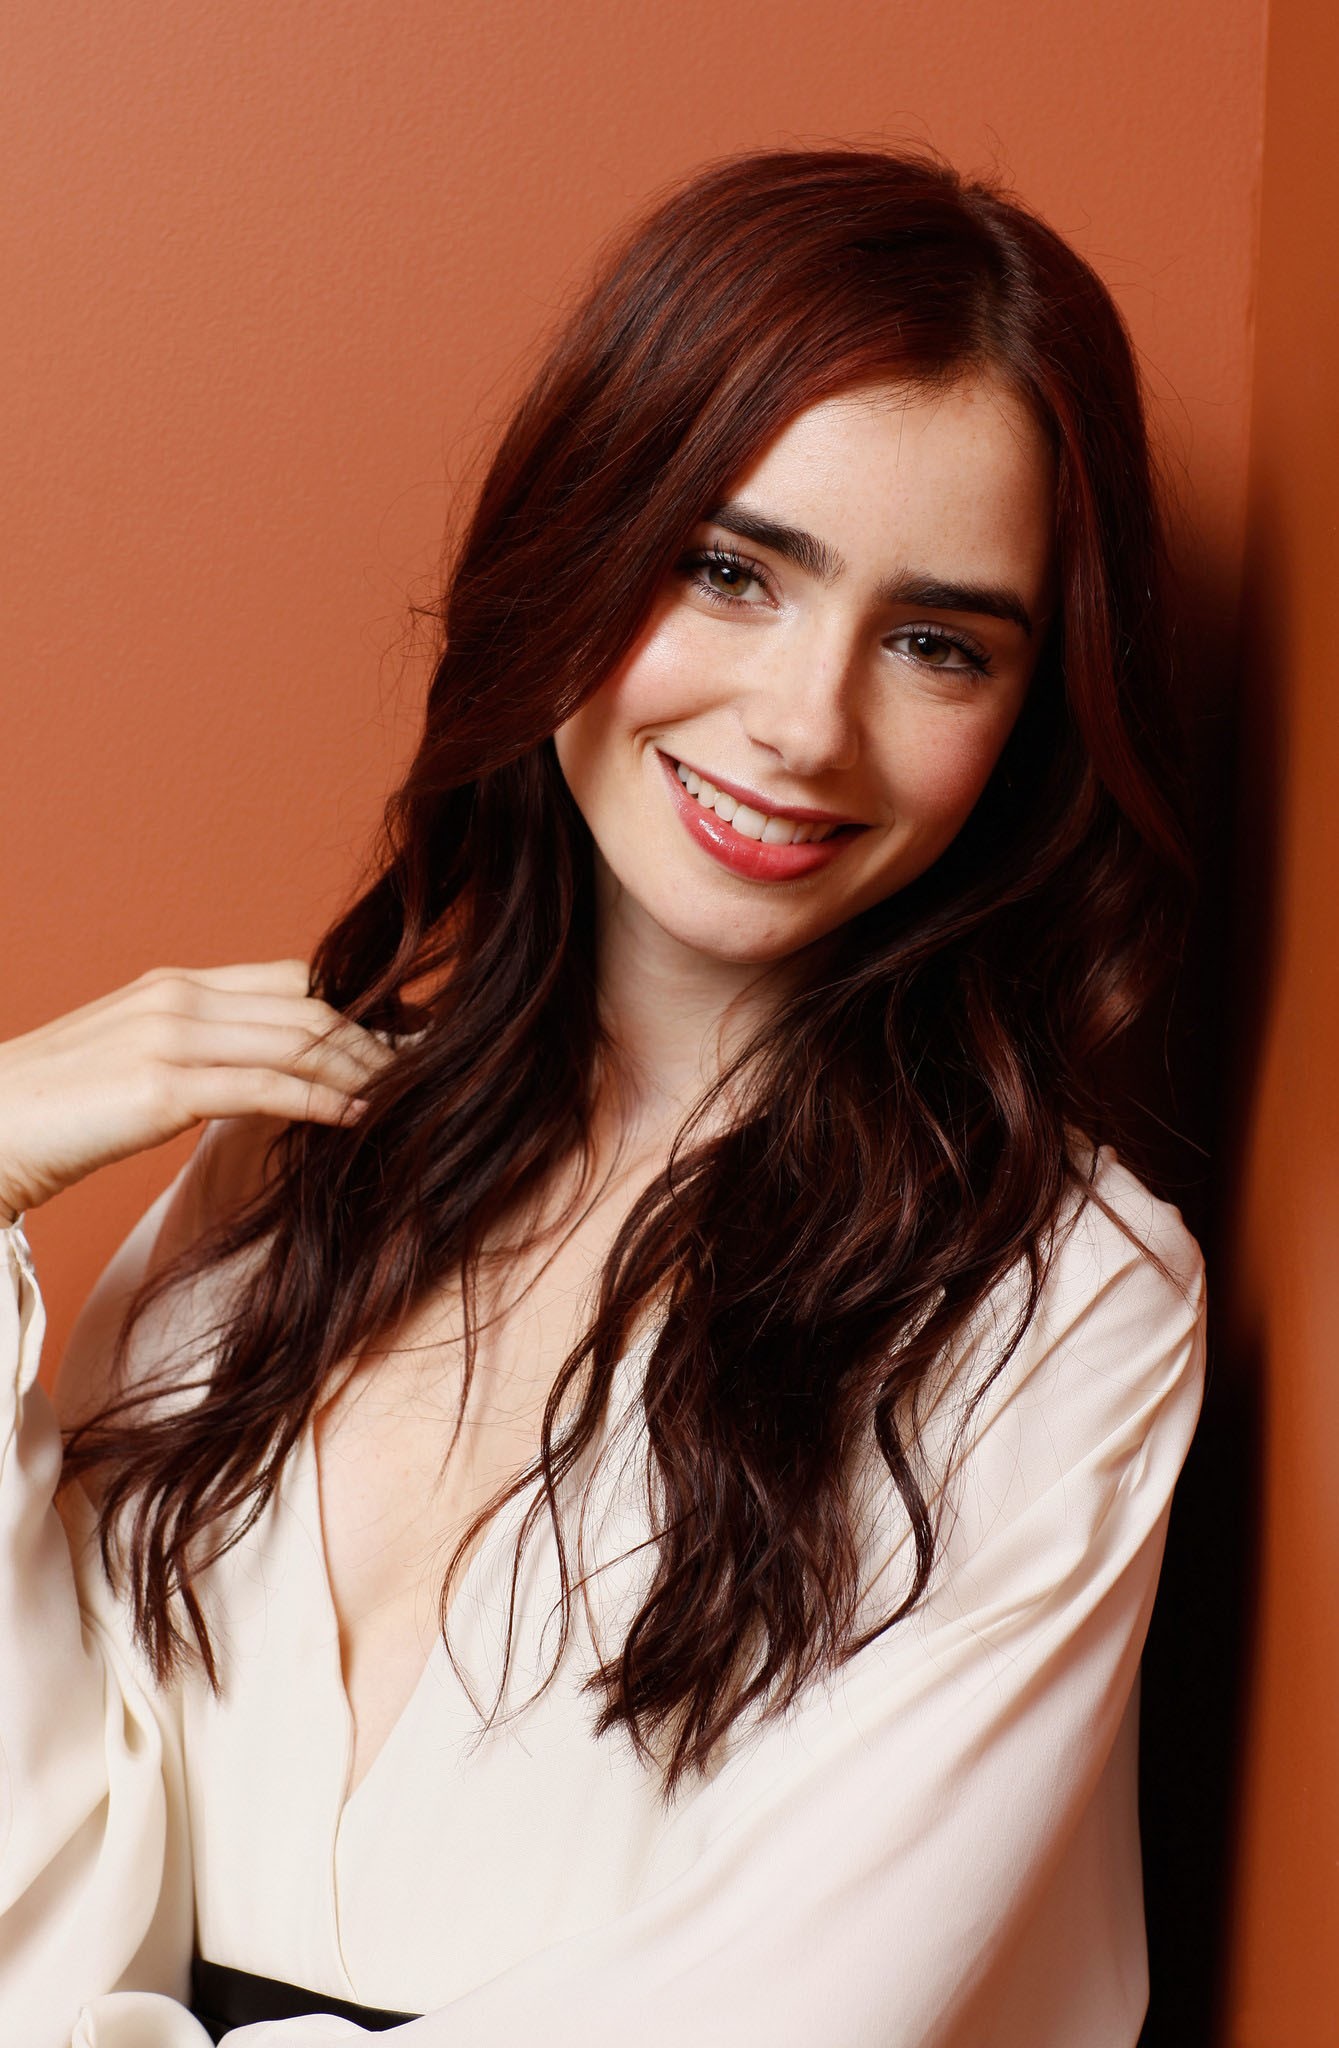 People 1339x2048 Lily Collins British British women British model women actress model orange background redhead dyed hair long hair women indoors indoors smiling red lipstick portrait display simple background